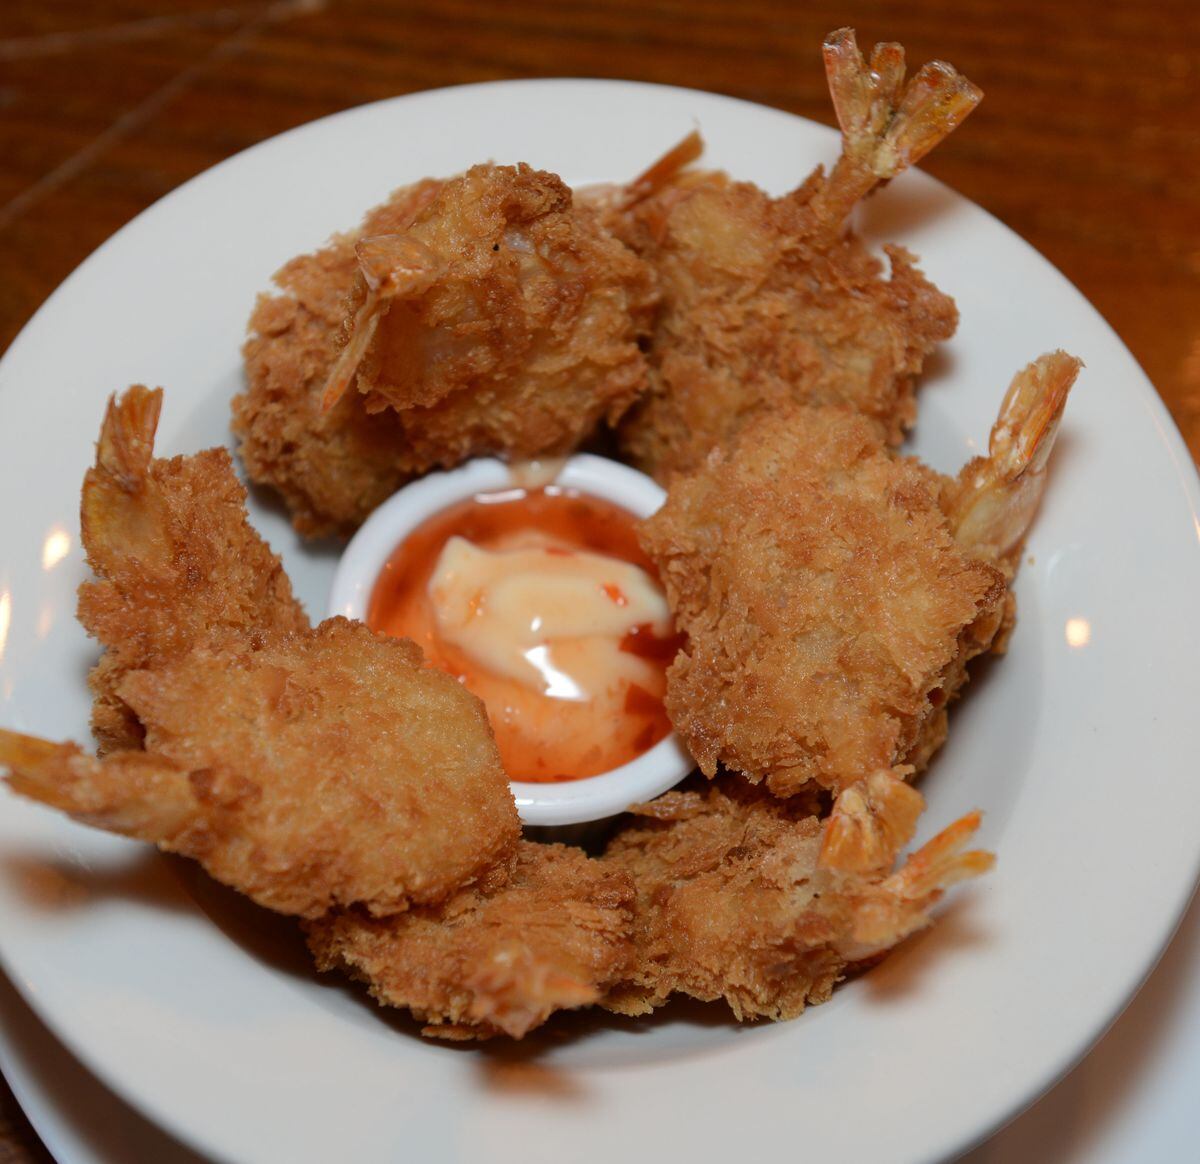 Shell out – on some coconut shrimp with dip